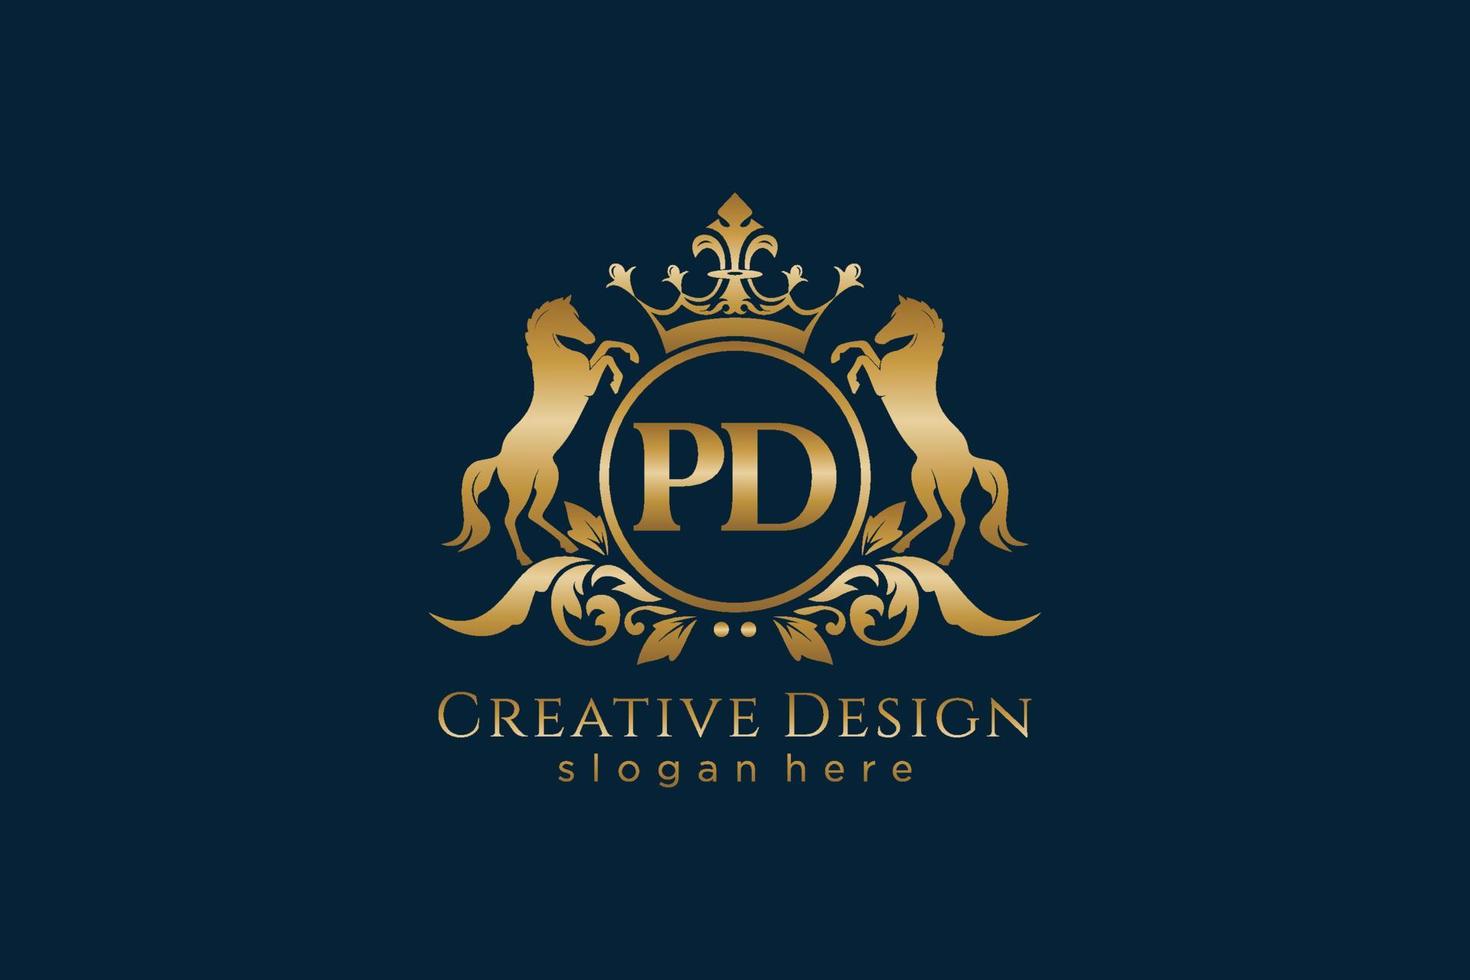 initial PD Retro golden crest with circle and two horses, badge template with scrolls and royal crown - perfect for luxurious branding projects vector